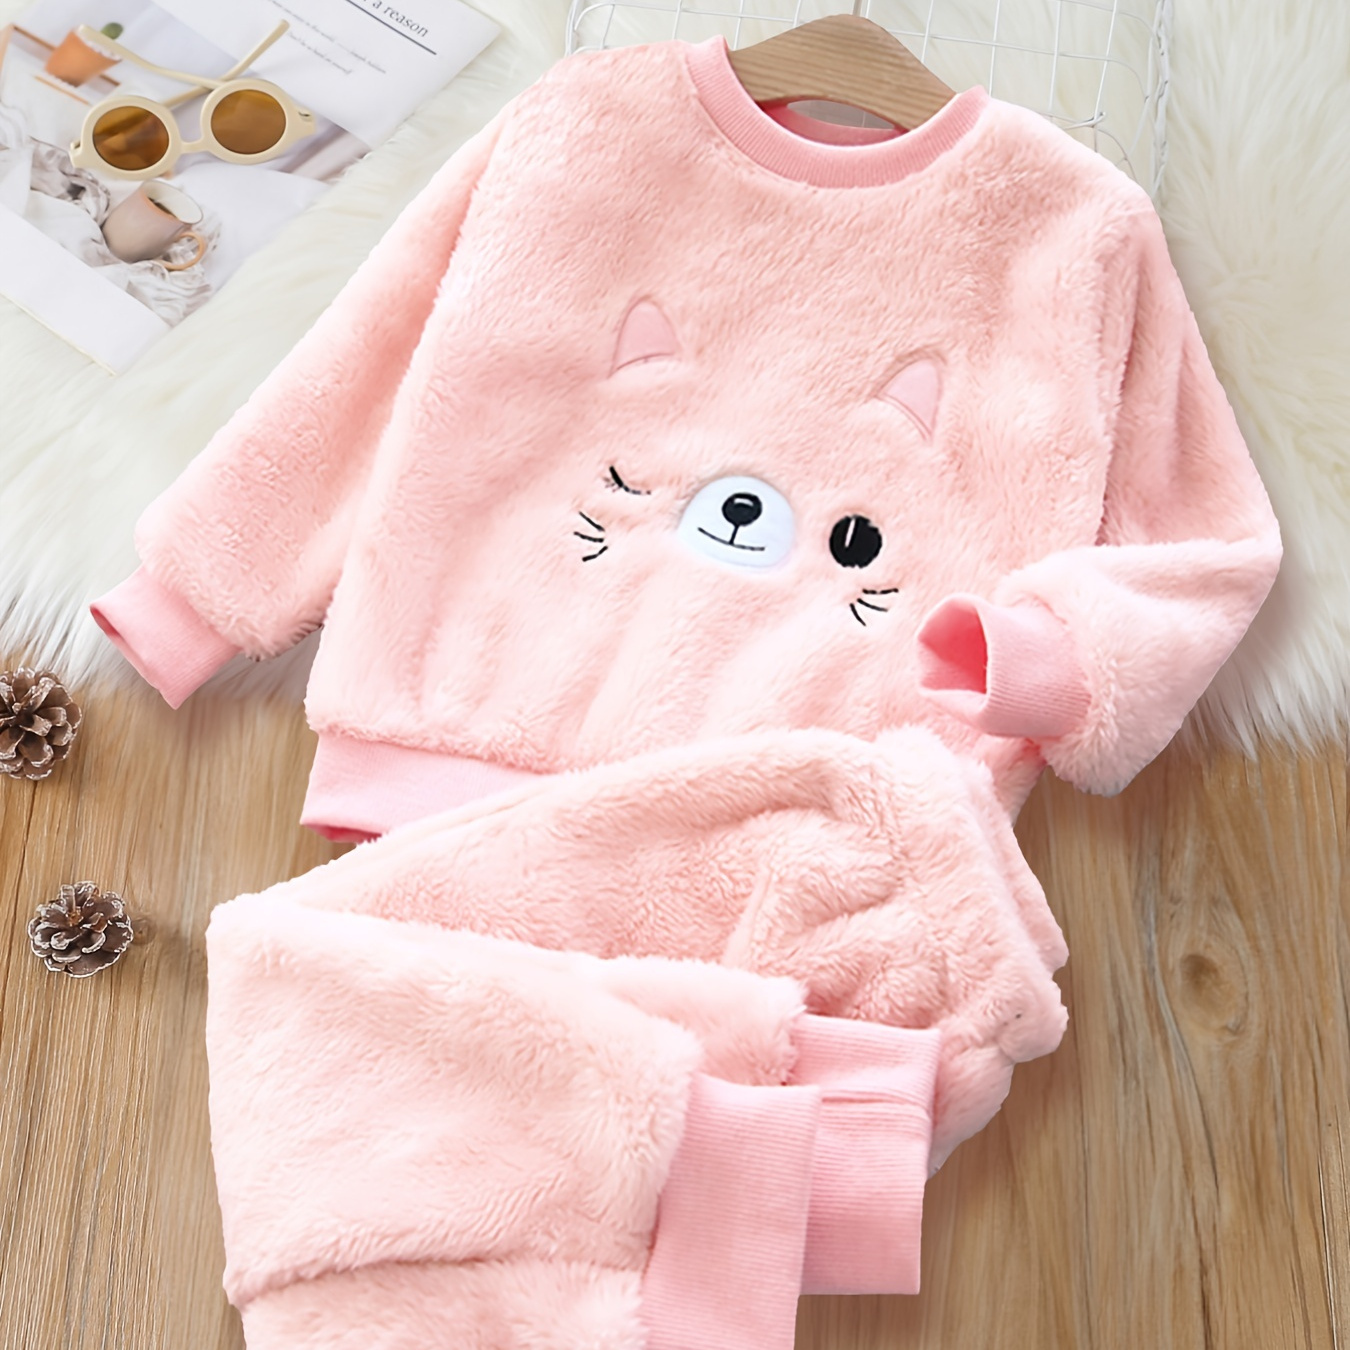 

Girl's Cat Embroidered Outfit 2pcs, Fuzzy Fleece Sweatshirt & Jogger Pants Set, Soft Loungewear, Kid's Clothes For Spring Fall